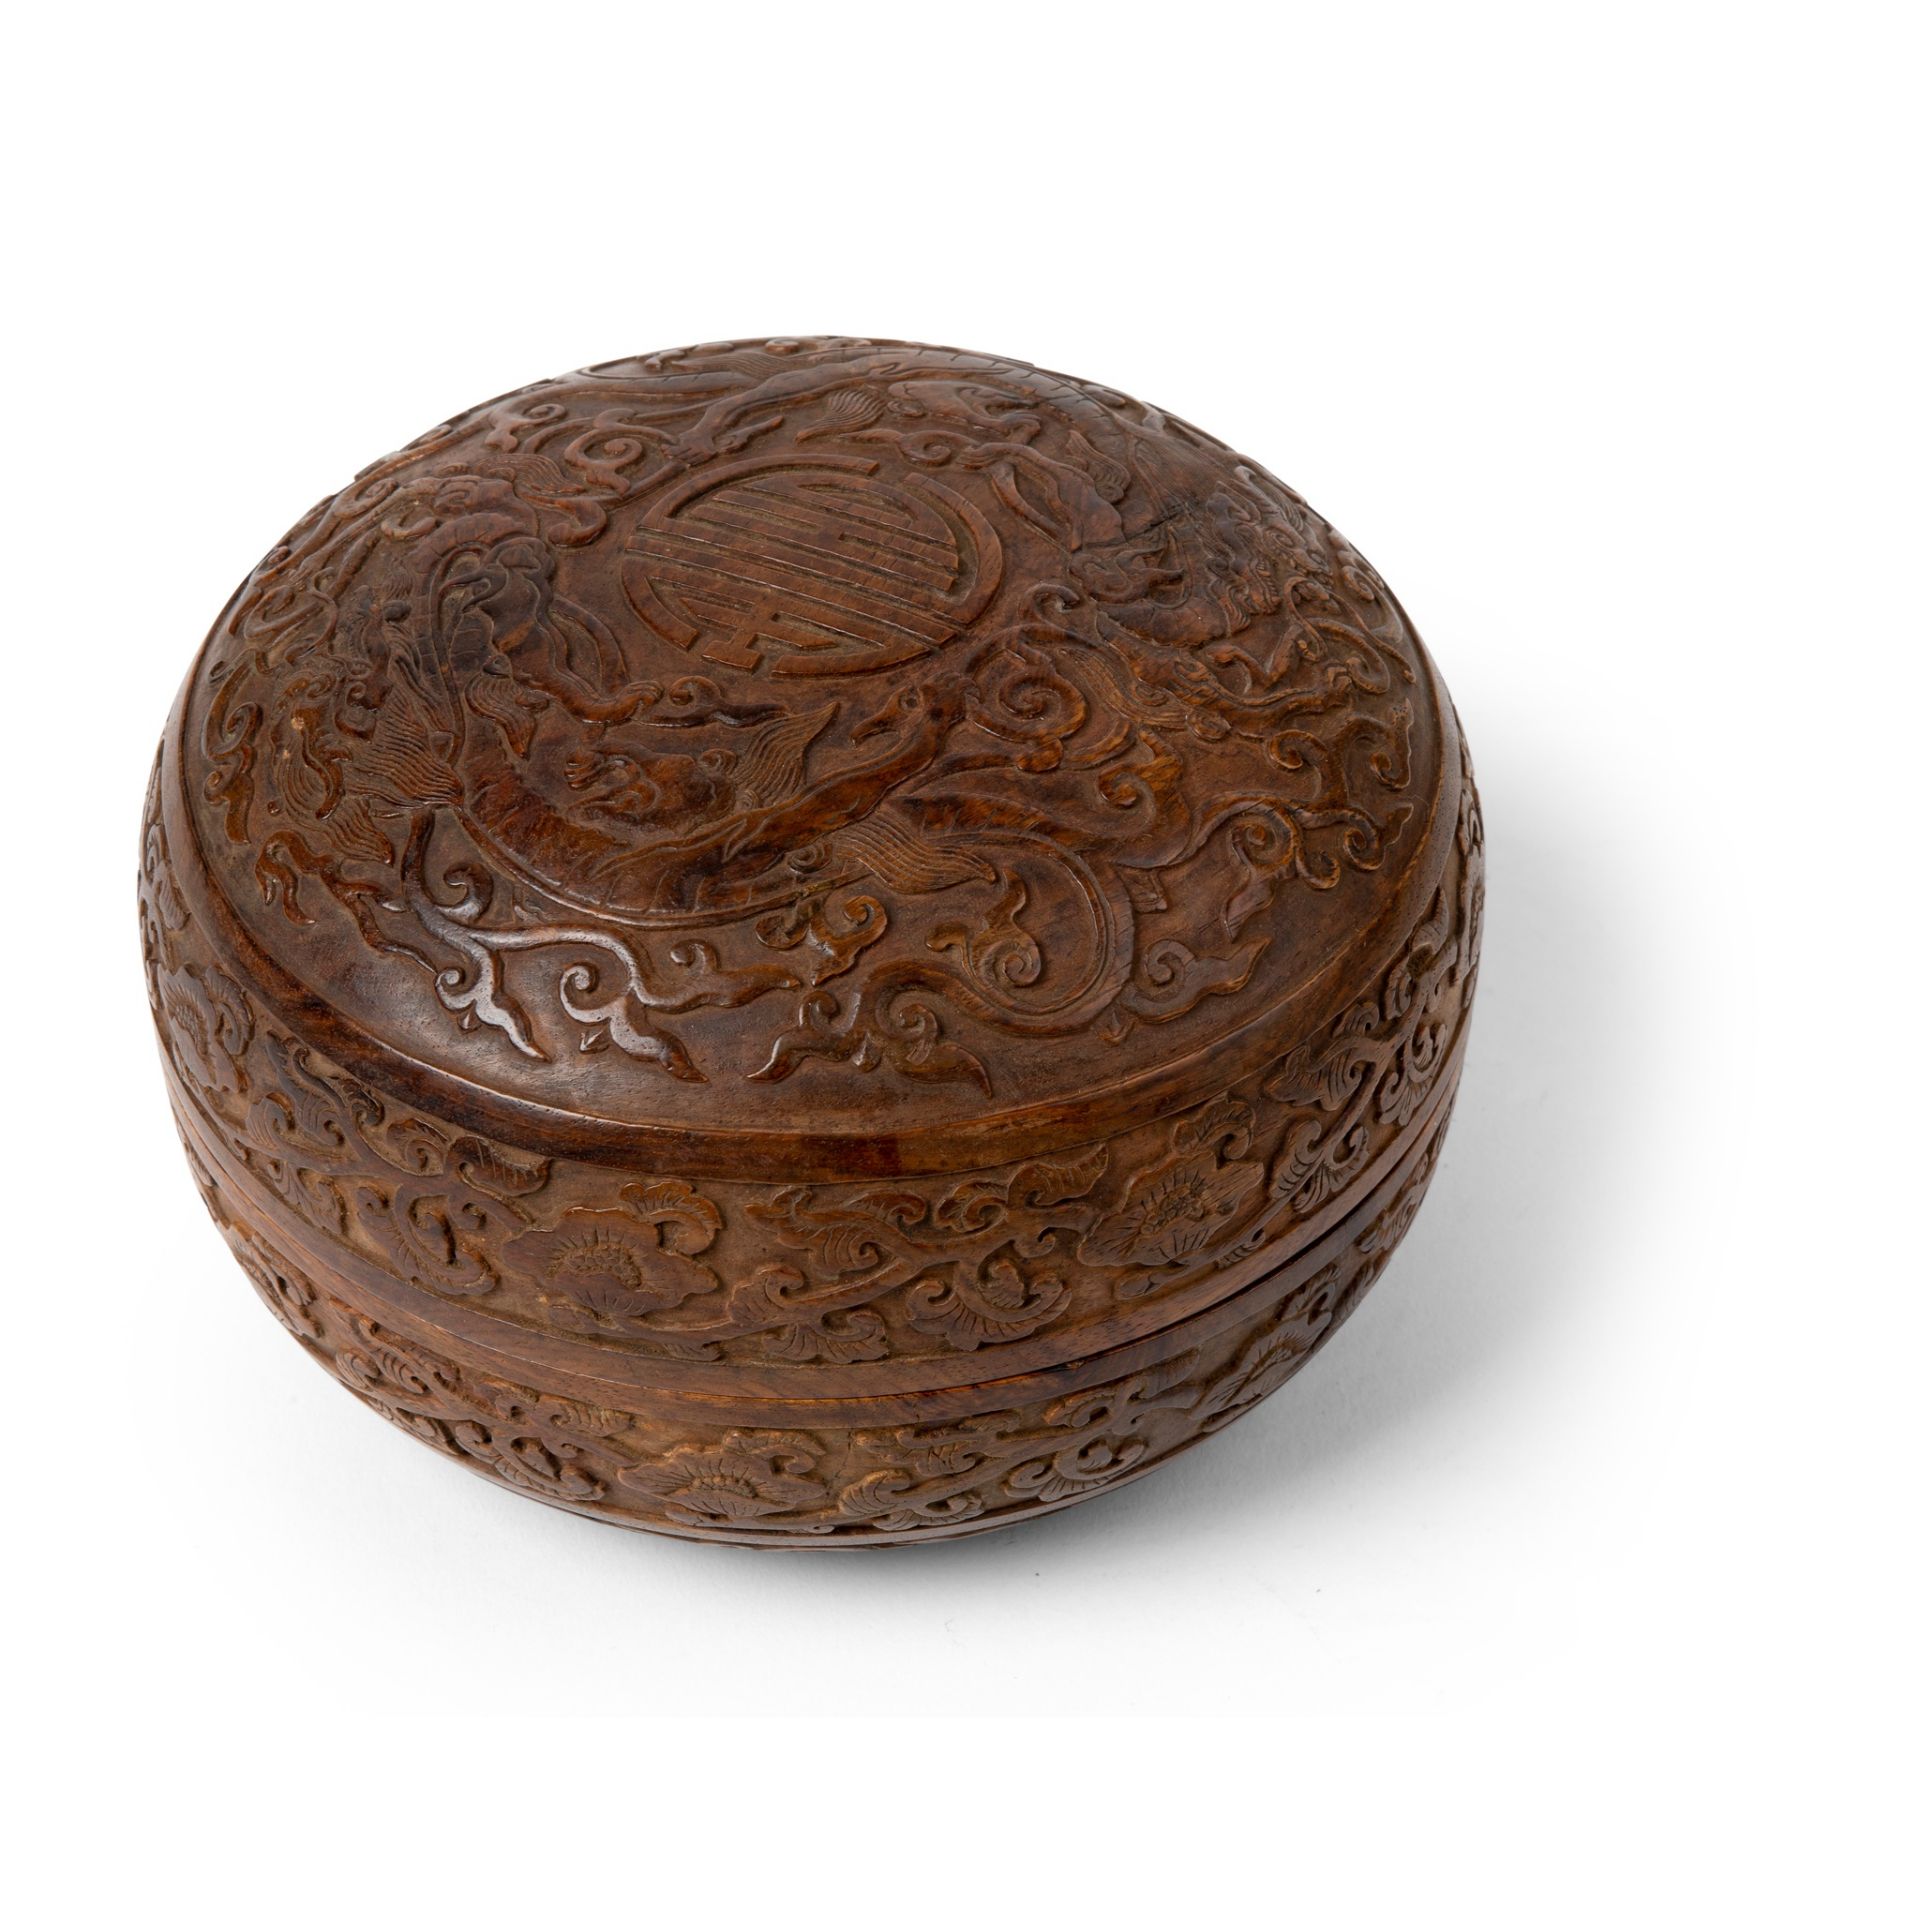 HUANGHUALI CARVED 'DRAGON' CIRCULAR BOX AND COVER QING DYNASTY, 18TH CENTURY - Image 2 of 3